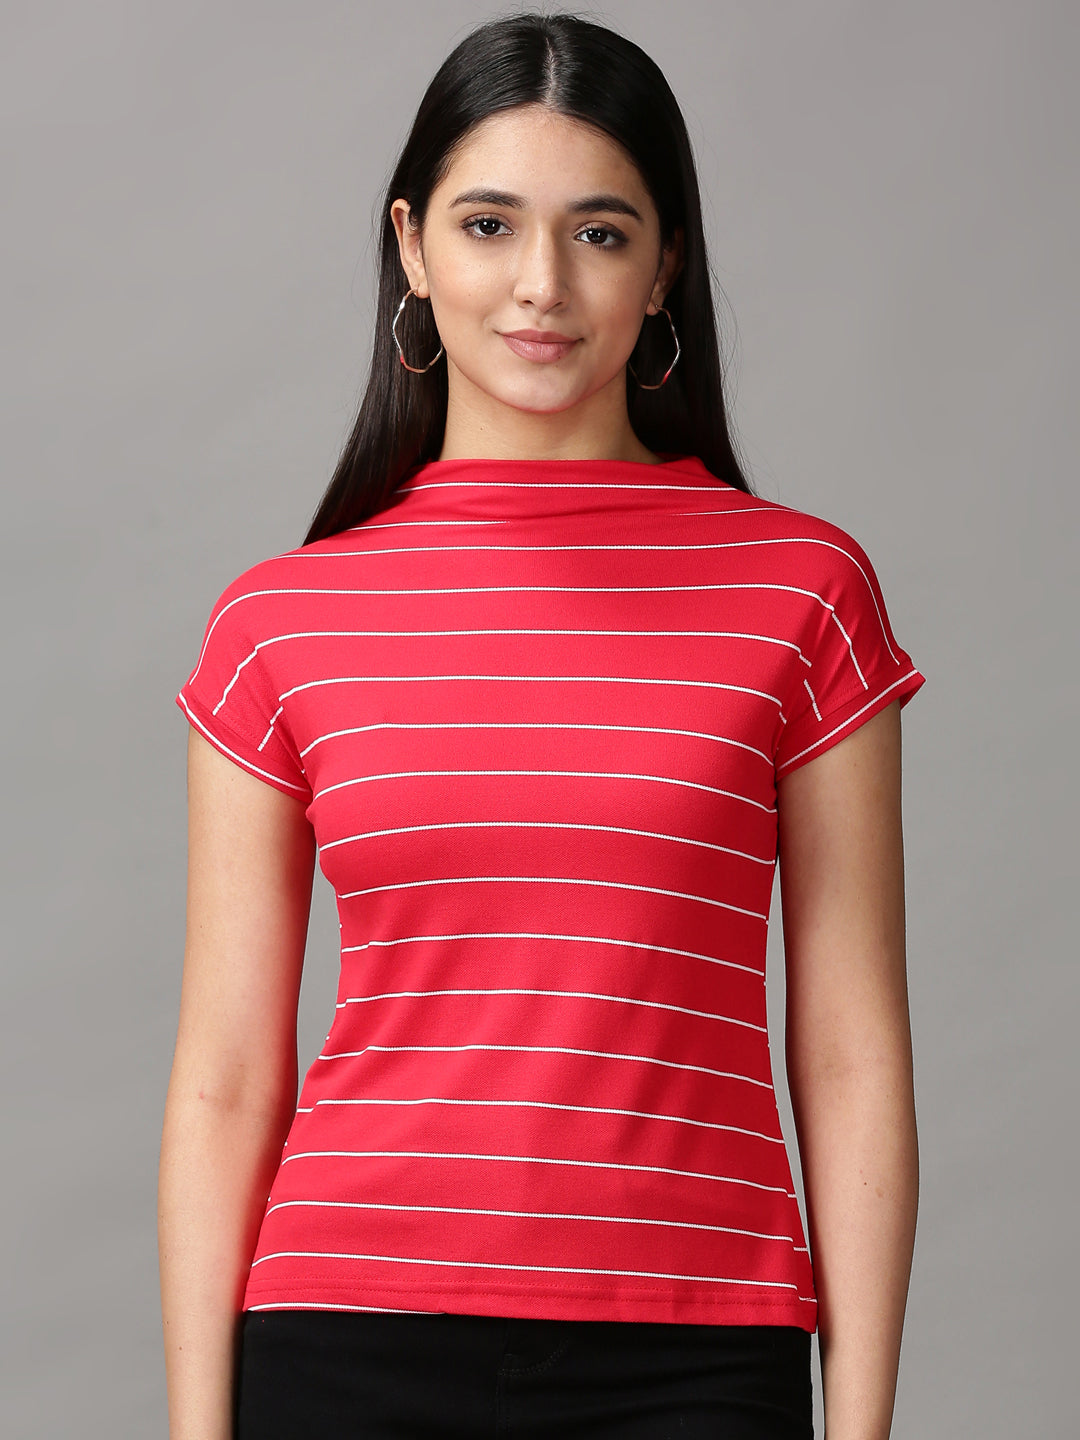 Women's Red Striped Top